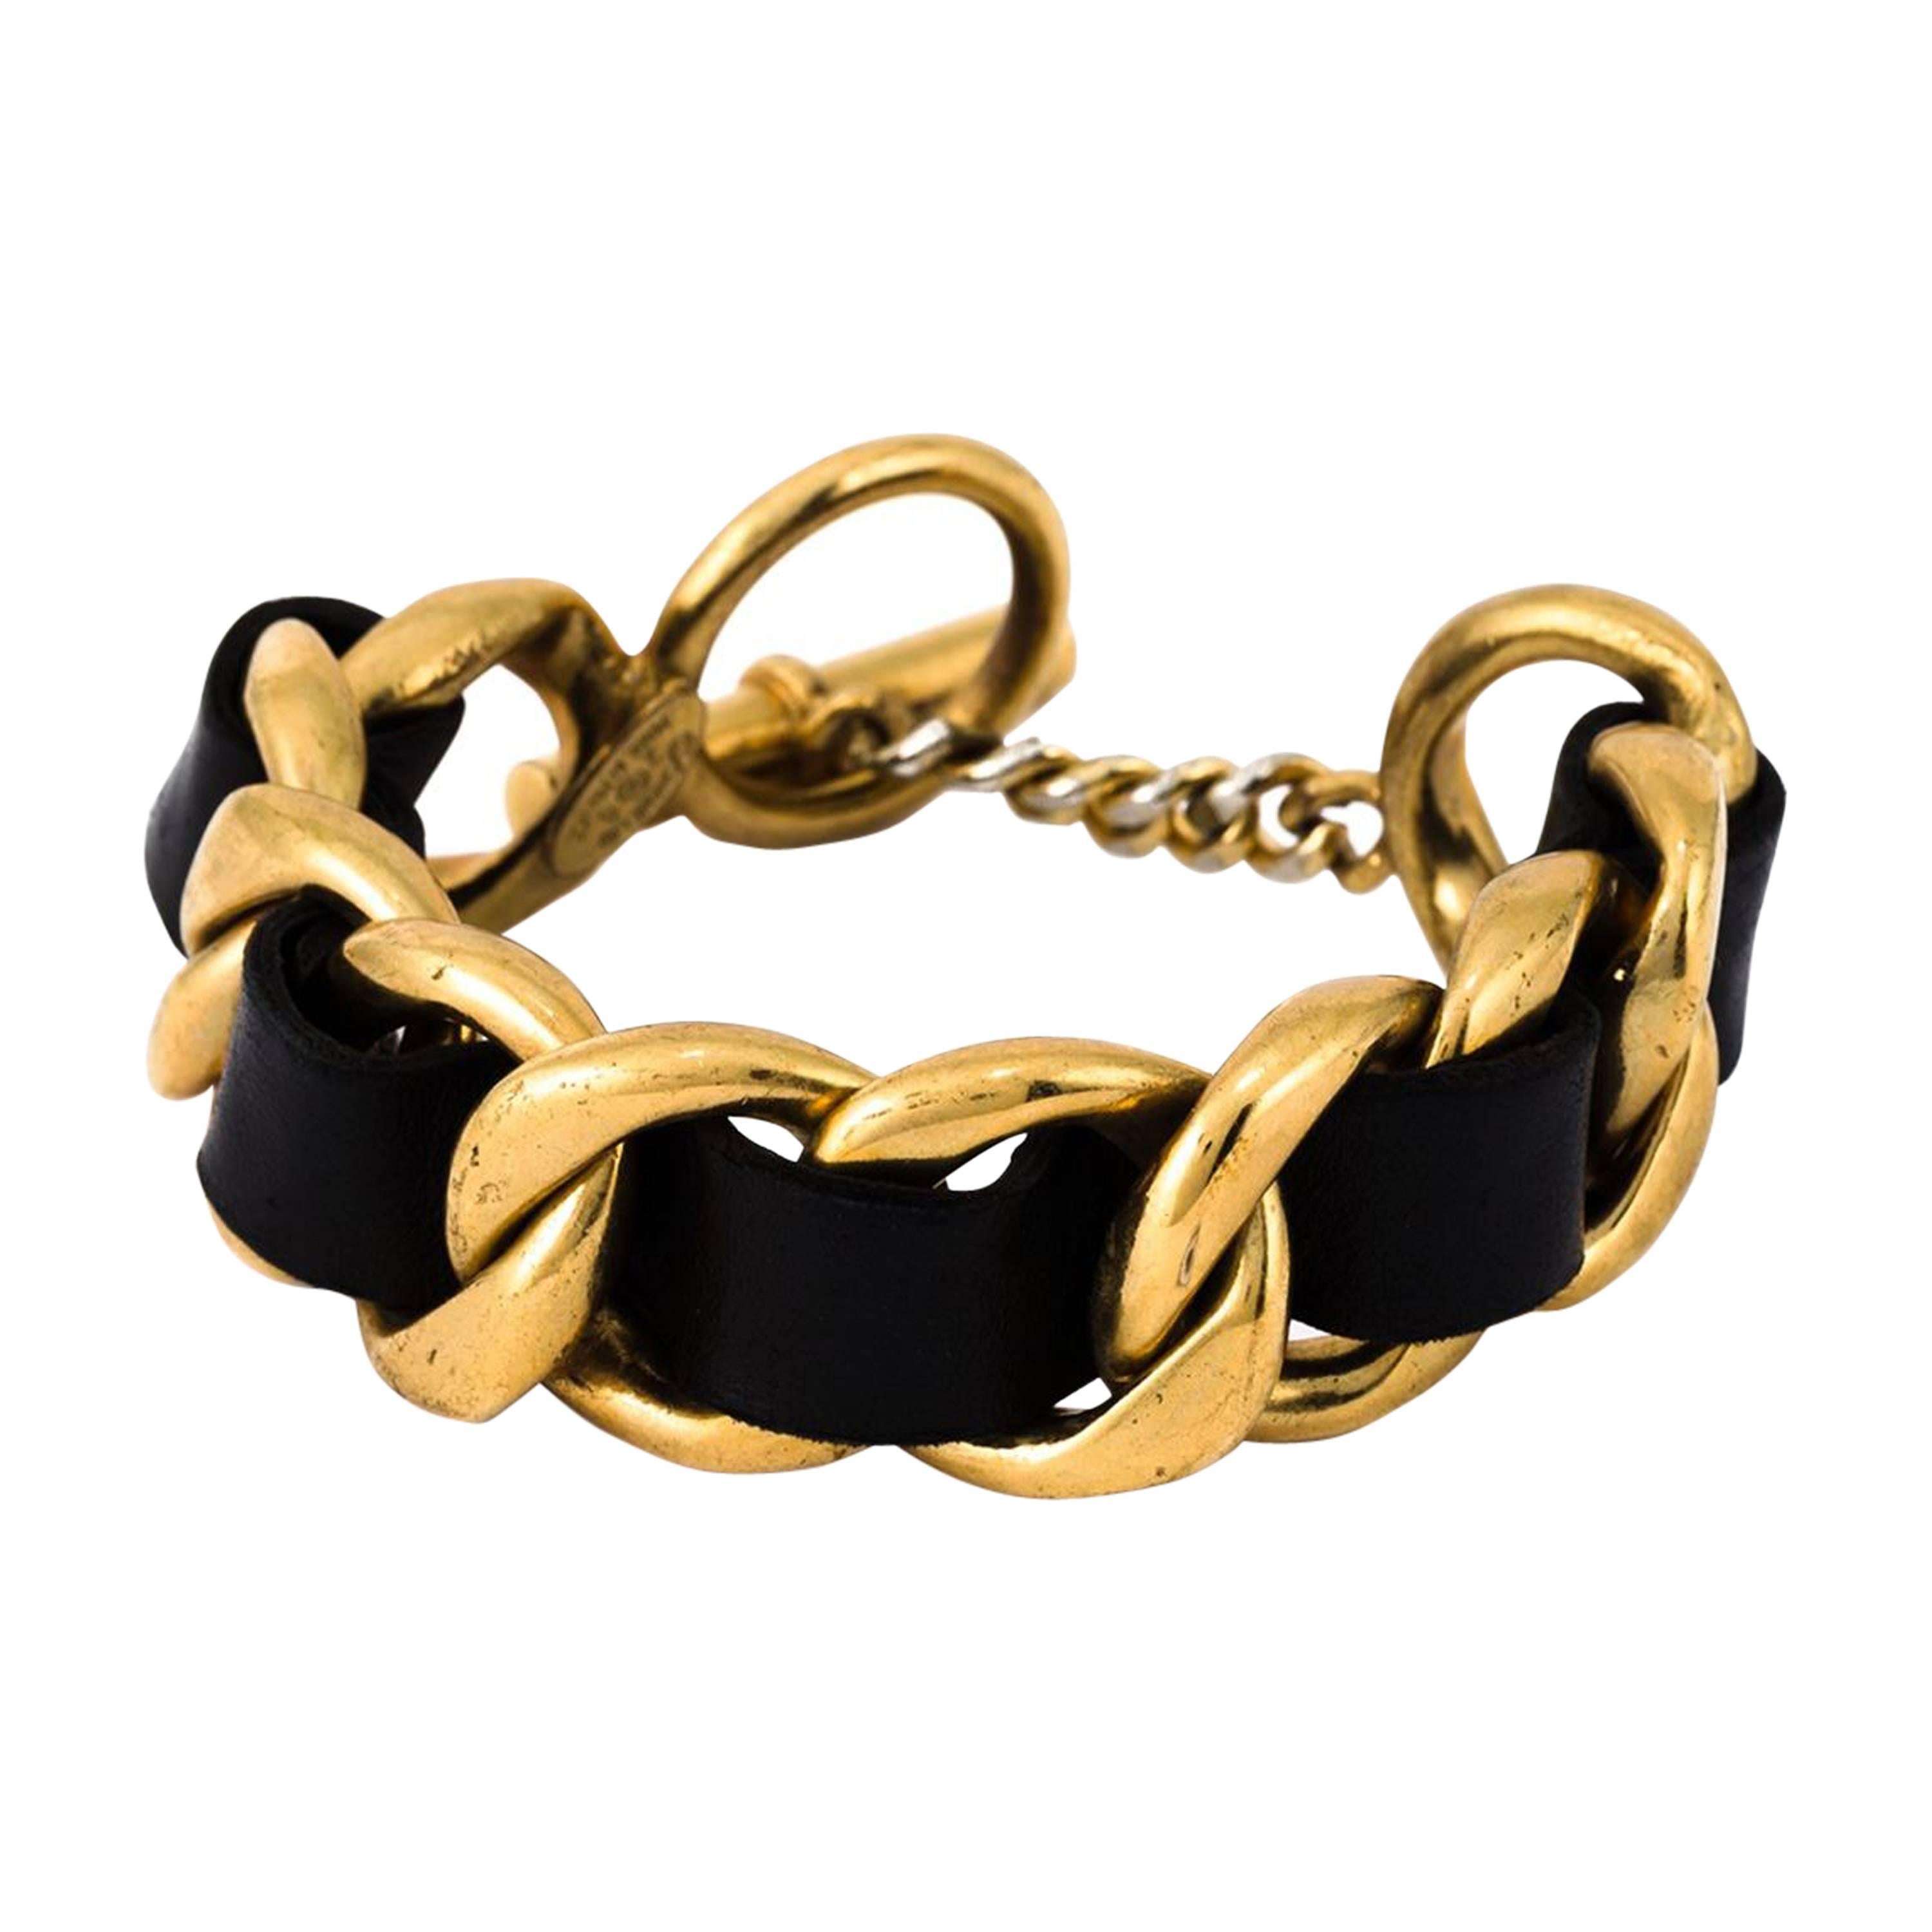 Chanel Gold Leather Chain Bracelet